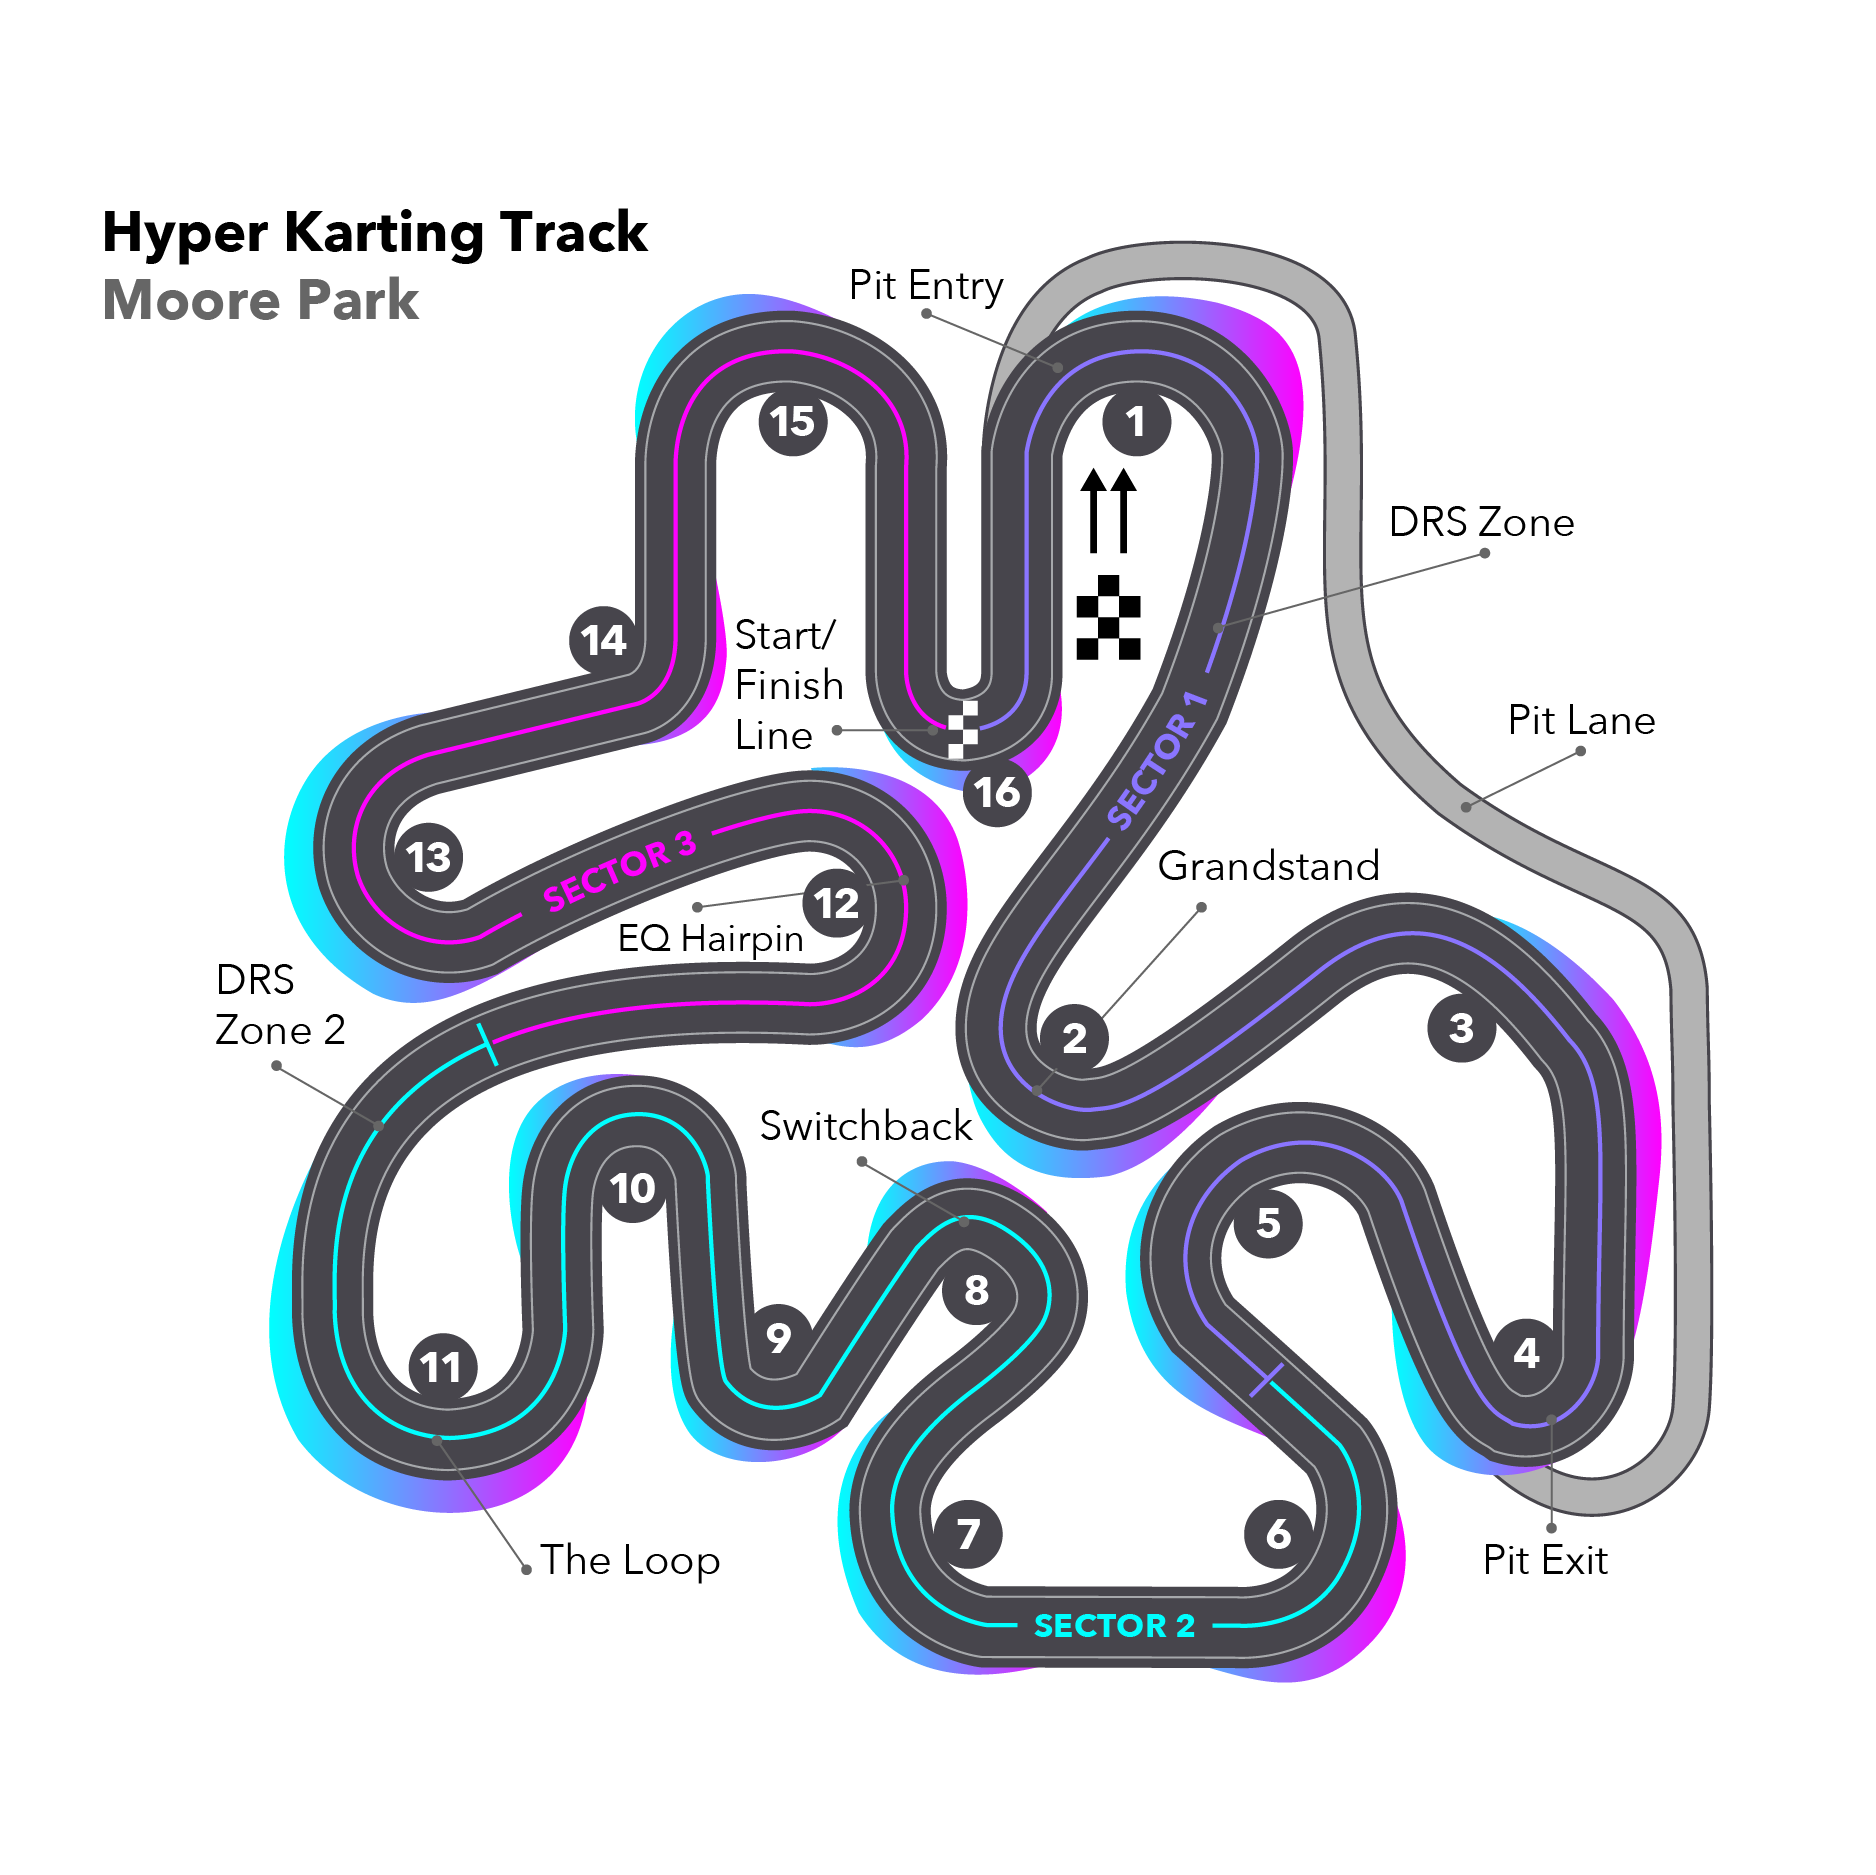 Map of Hyper Karting track at Moore Park, with 16 turns and pit